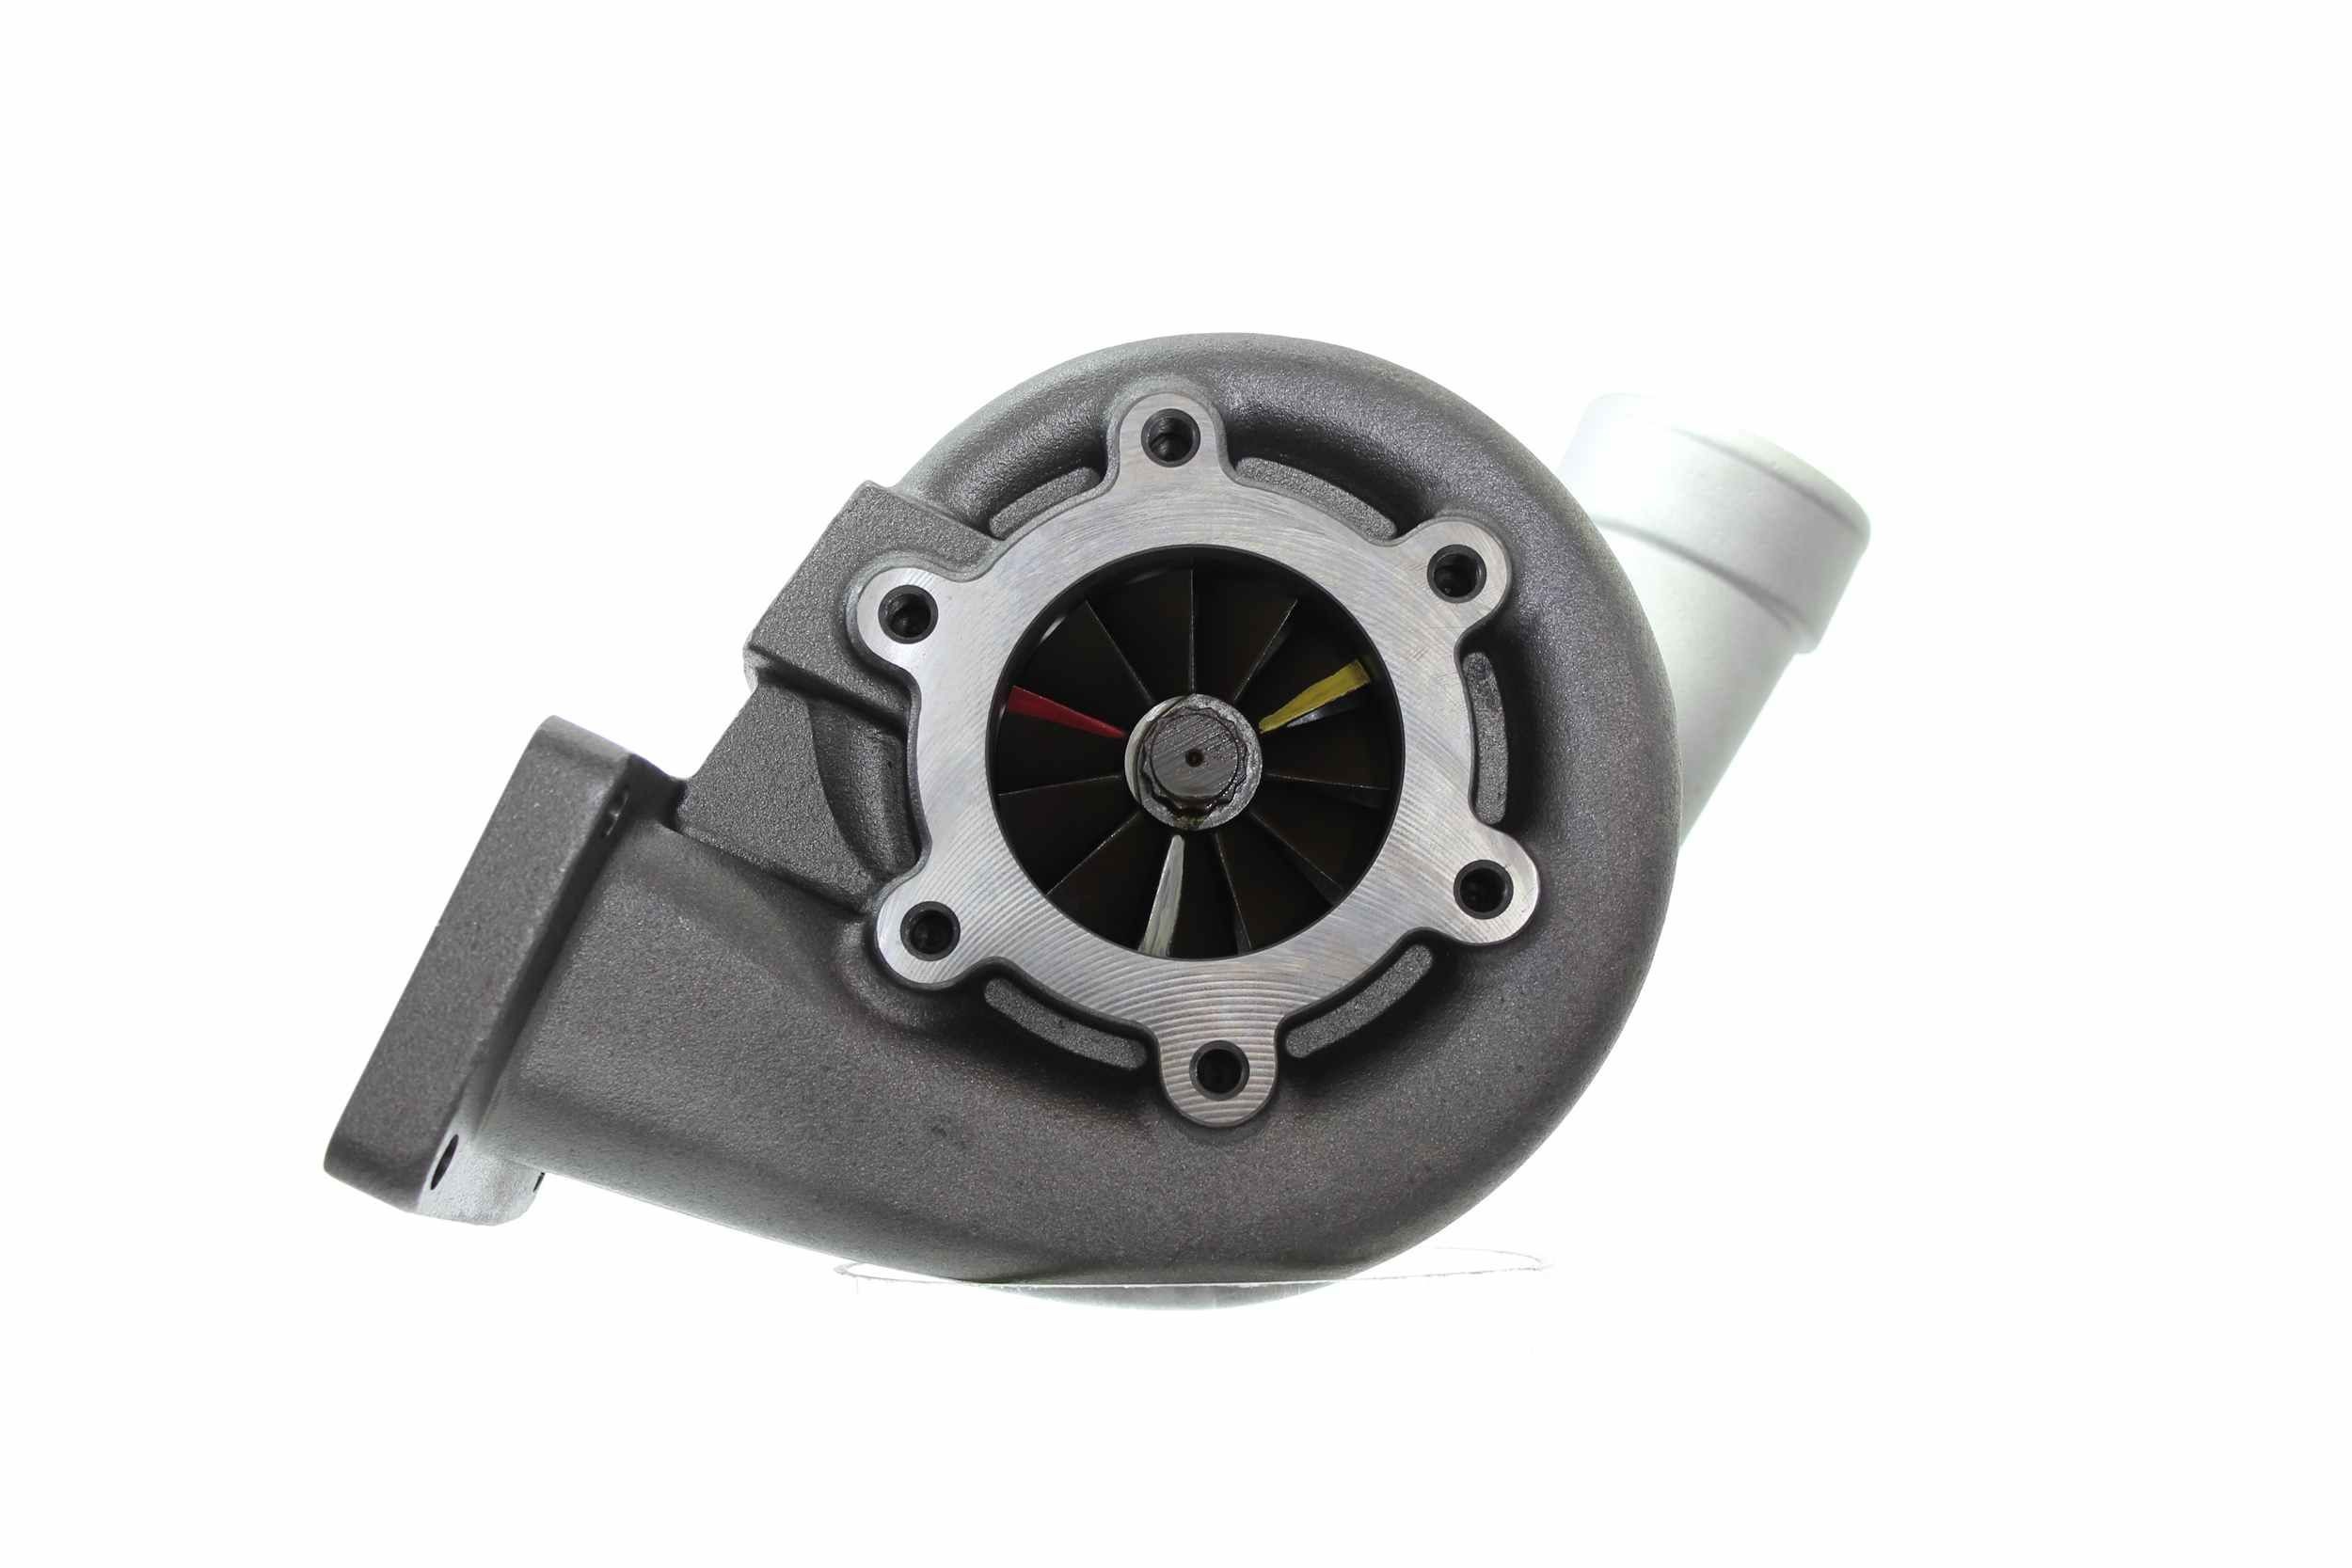 ALANKO 900256 Turbo Exhaust Turbocharger, Incl. Gasket Set, with attachment material